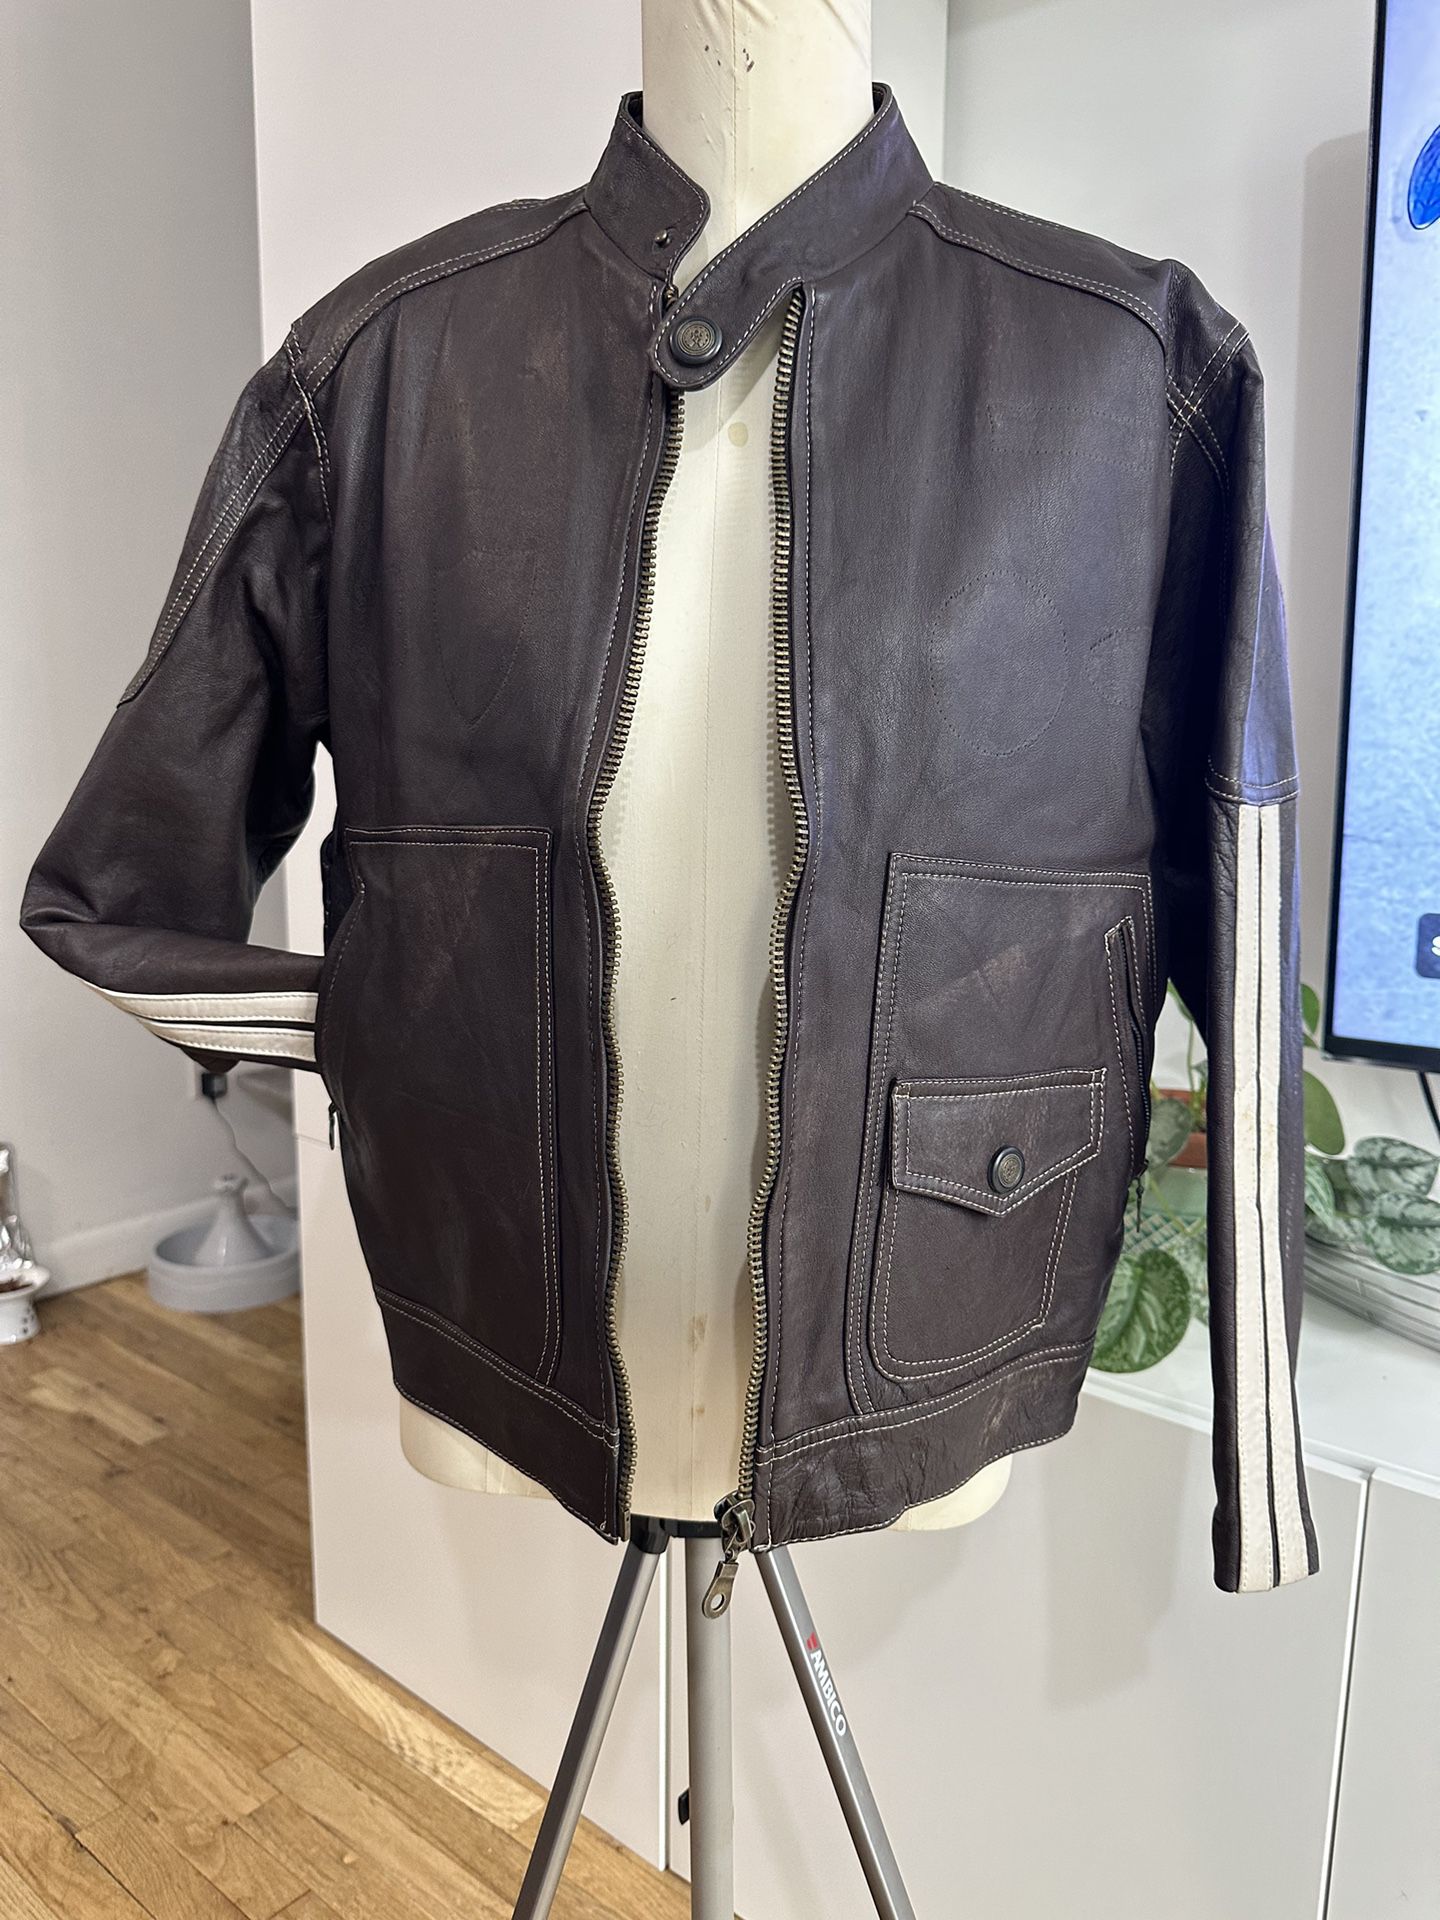 Leather Jacket For Men, Size Small Dark Brown $70